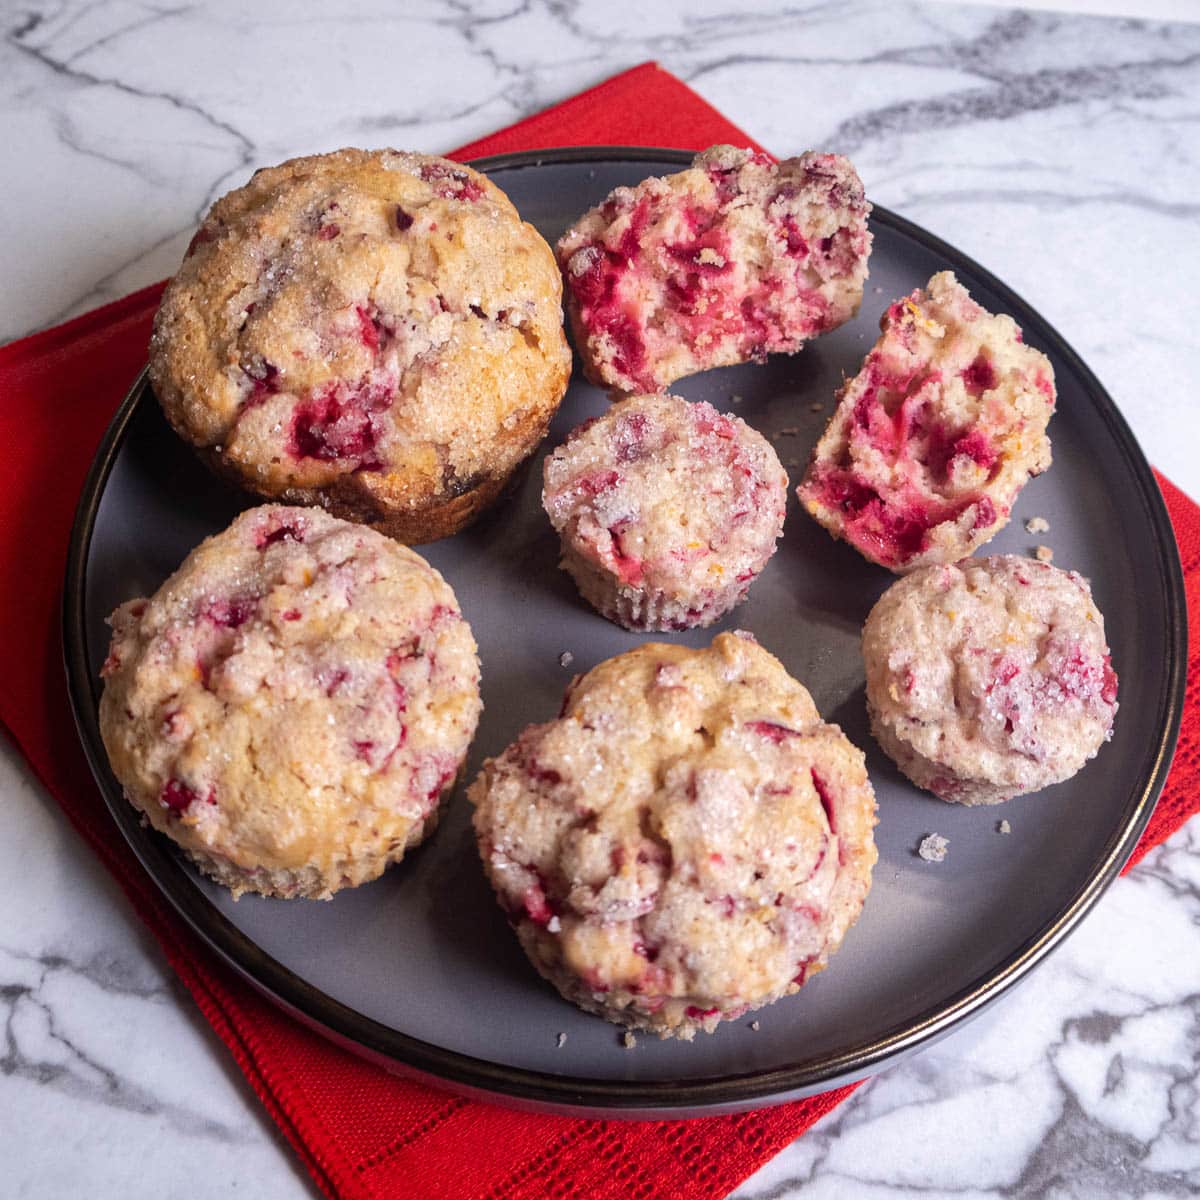 Cranberry Orange Muffins in three sizes, mini, regular and Texas on a gray plate with a red napkin.